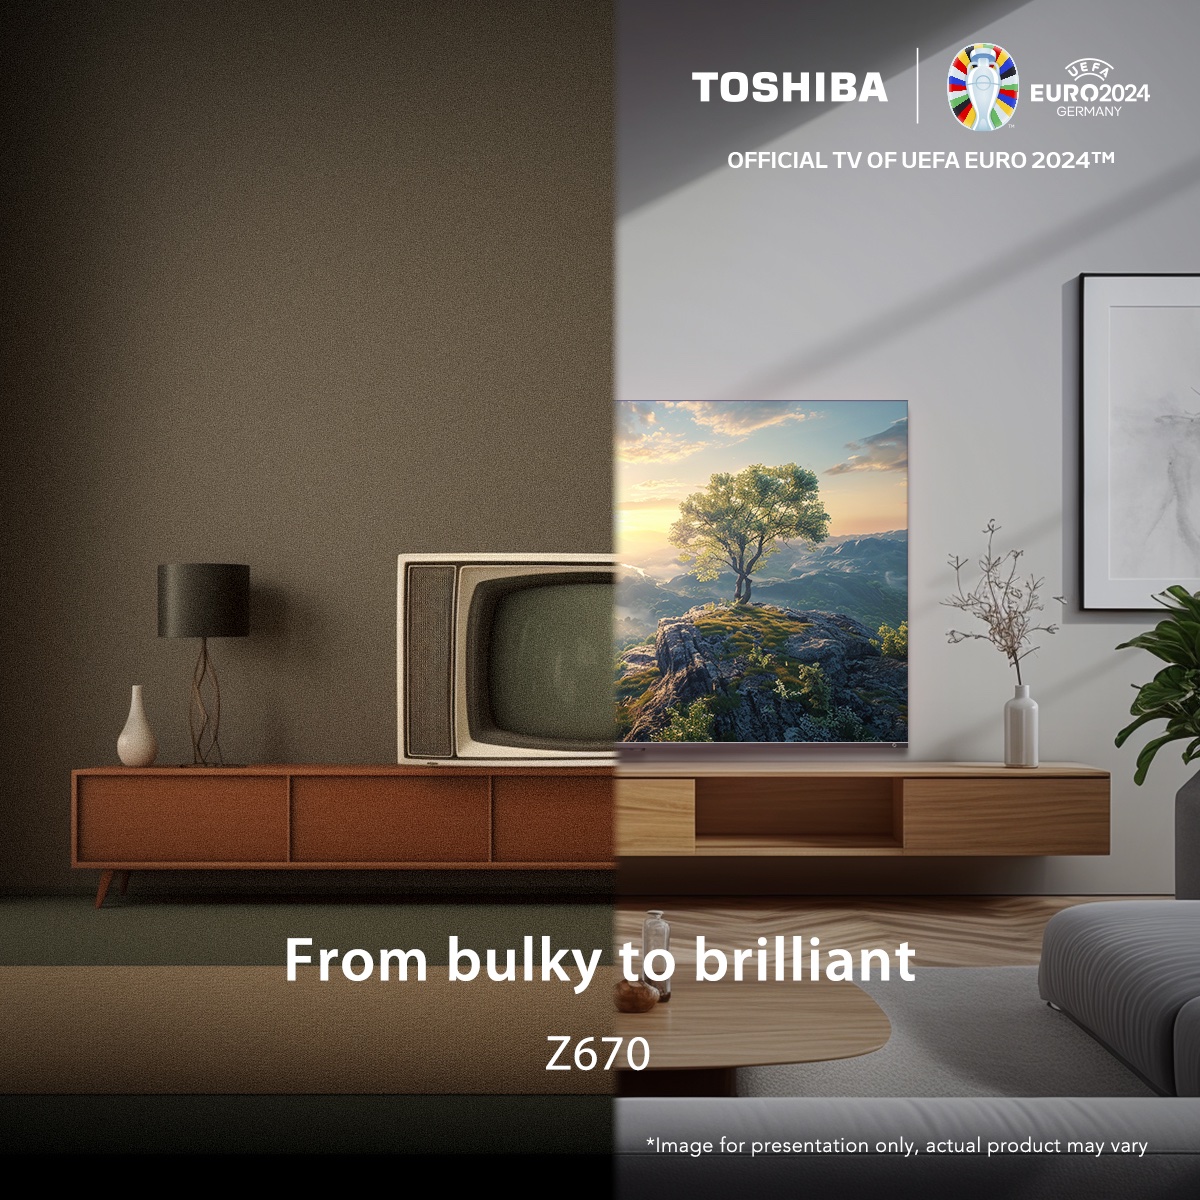 Remember the days of bulky CRT TVs? This #FlashbackFriday, we're celebrating the lighter side of entertainment with LED screens and #ToshibaTV Z670. What was your favorite show from the CRT era? Drop a comment, hit like if you love advancements in tech! #BeRealCraftsmanship